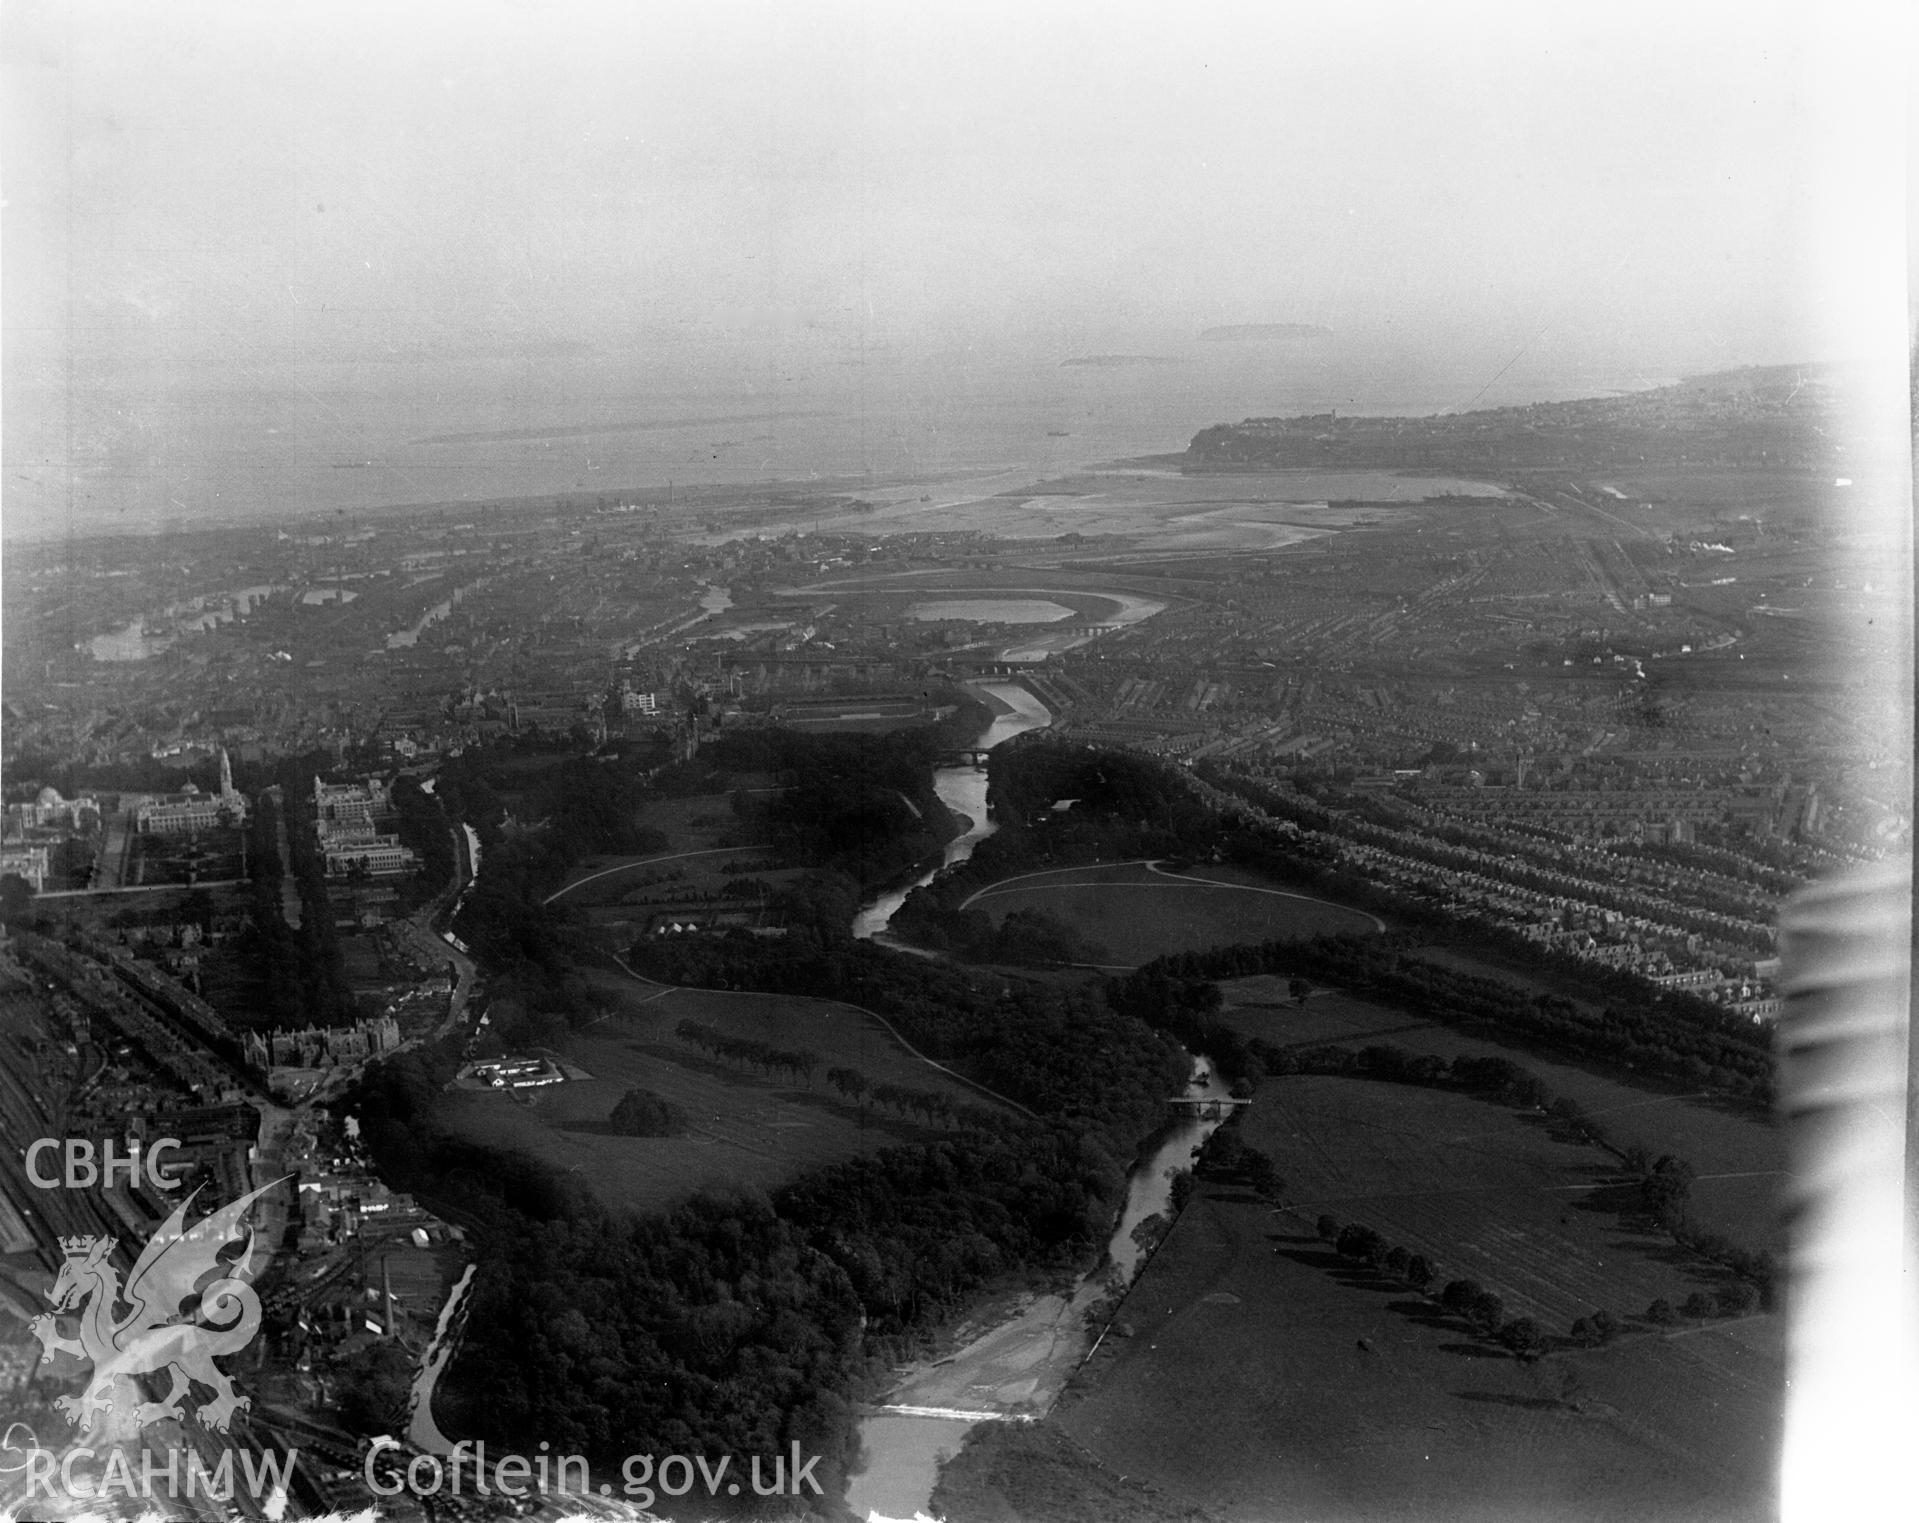 General view of Cardiff, oblique aerial view. 5?x4? black and white glass plate negative.